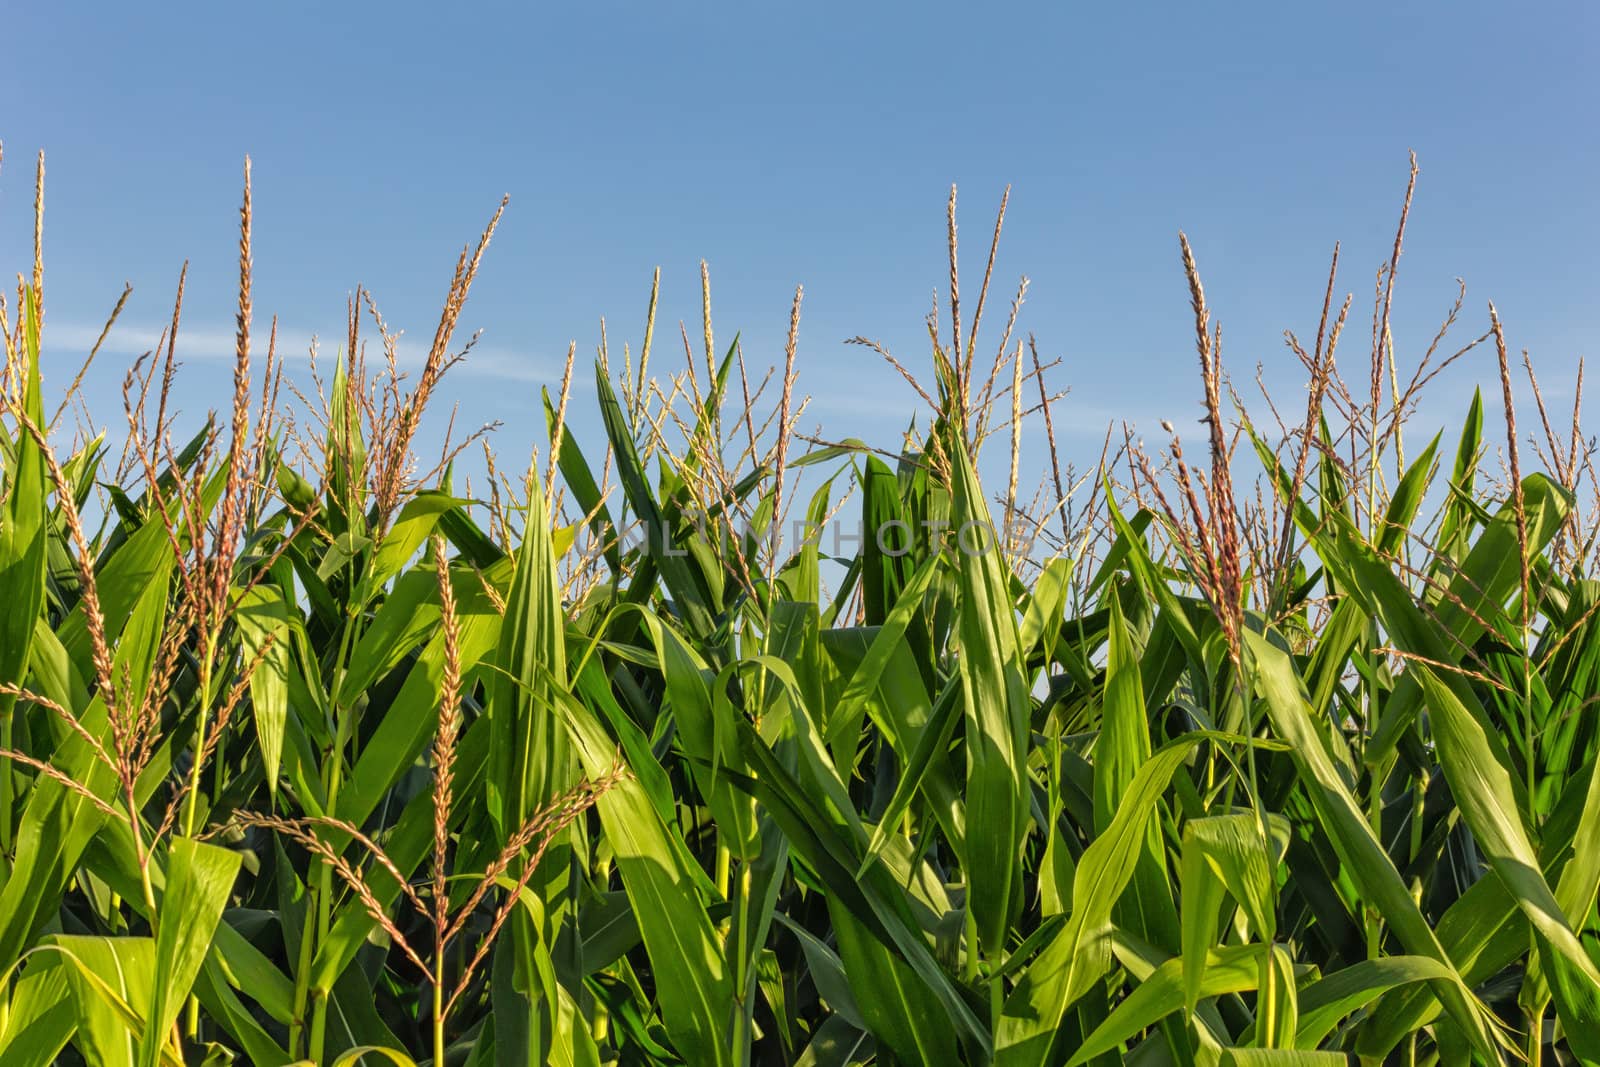 Tall Row of Field Corn by wolterk